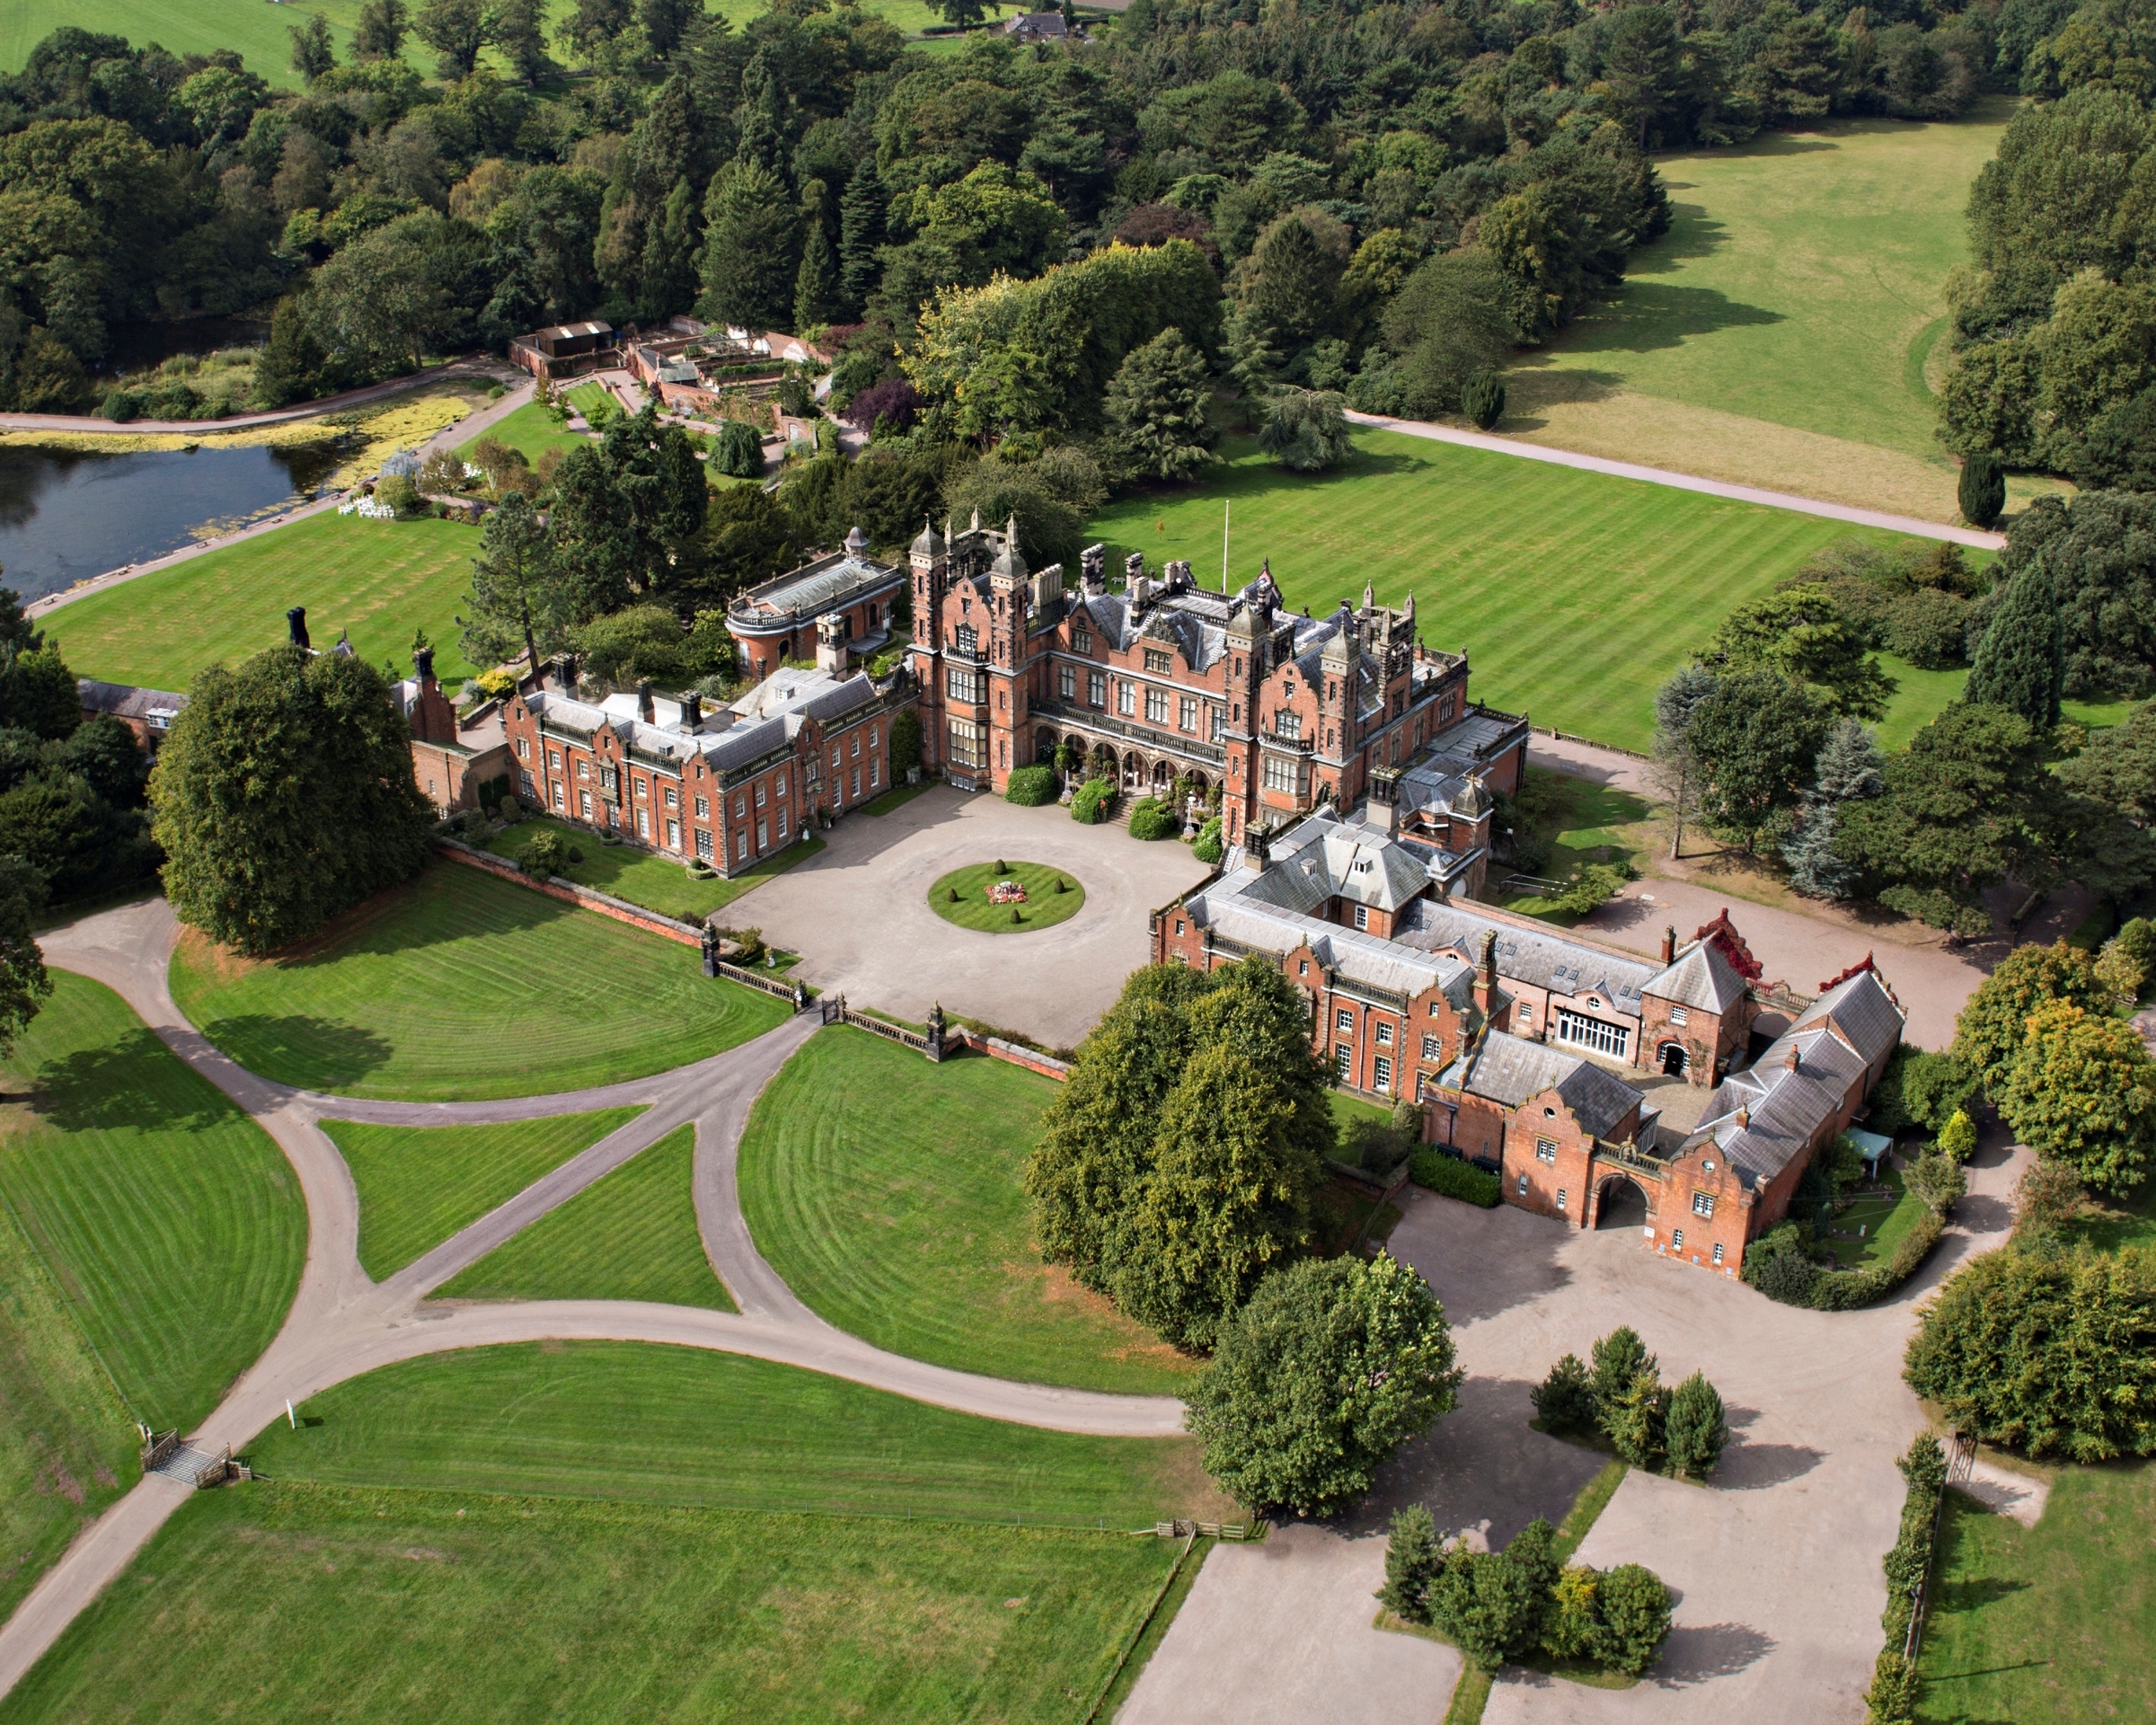 An aerial view of Capesthorne Hall